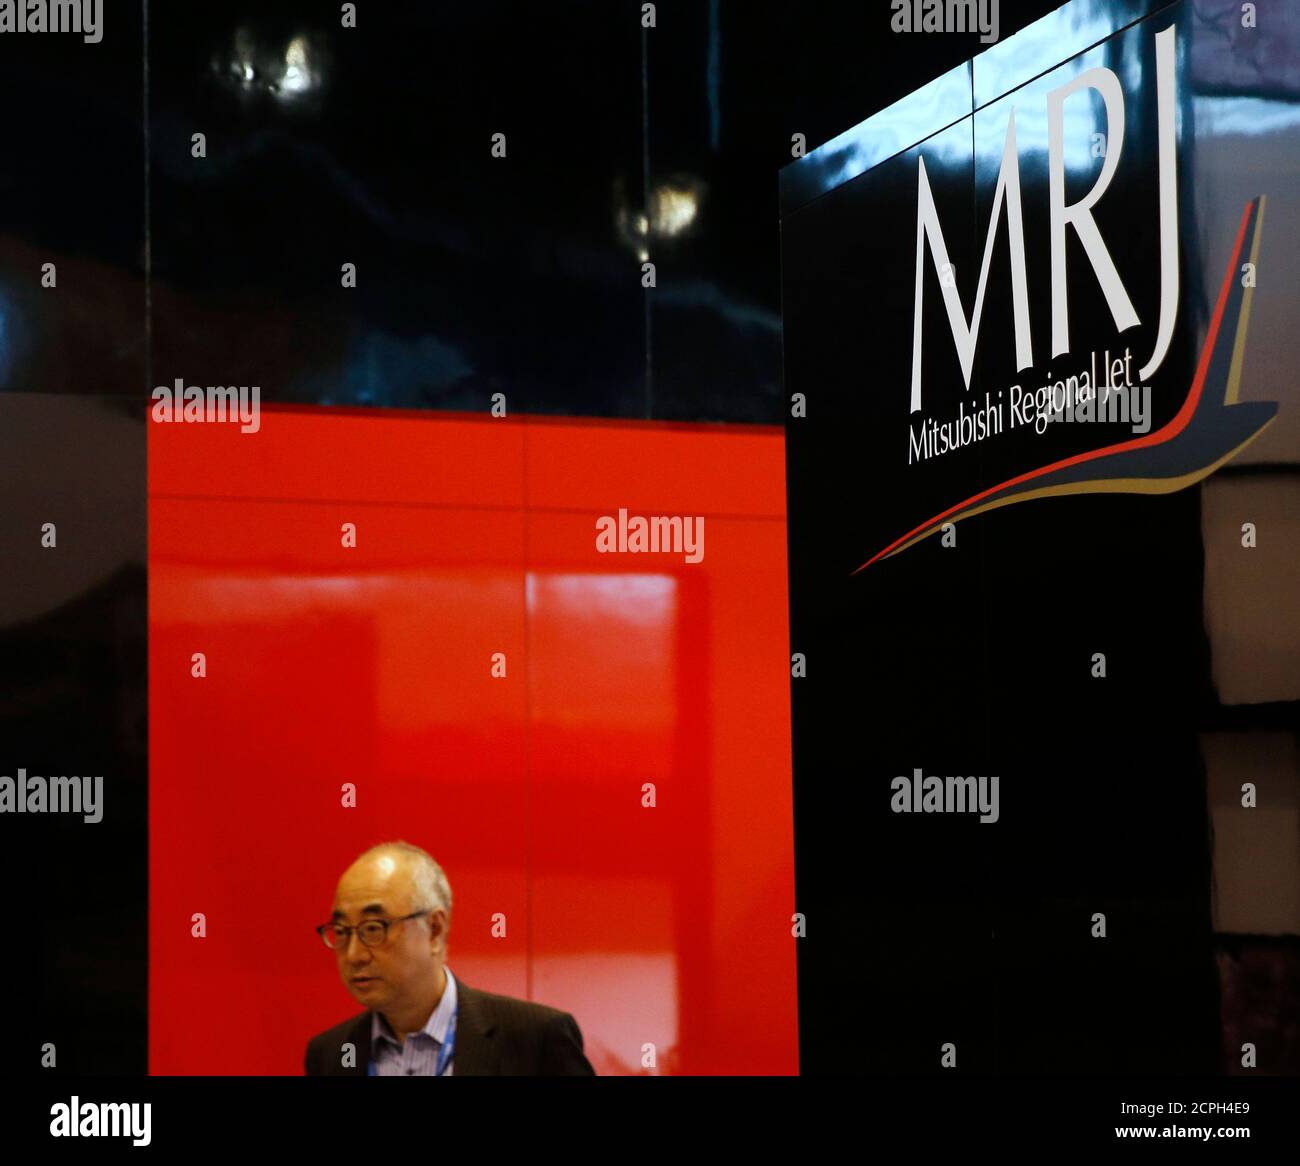 The logo of Mitsubishi Regional Jet (MRJ) is seen at the Mitsubishi Regional Jet booth during the opening day of the Singapore Airshow at Changi Exhibition Center February 16, 2016. Mitsubishi Aircraft Corp, a unit of Mitsubishi Heavy Industries Ltd, has struck a deal to supply 20 regional jets to U.S. leasing firm Aerolease, its first agreement with a lessor. REUTERS/Edgar Su Stock Photo